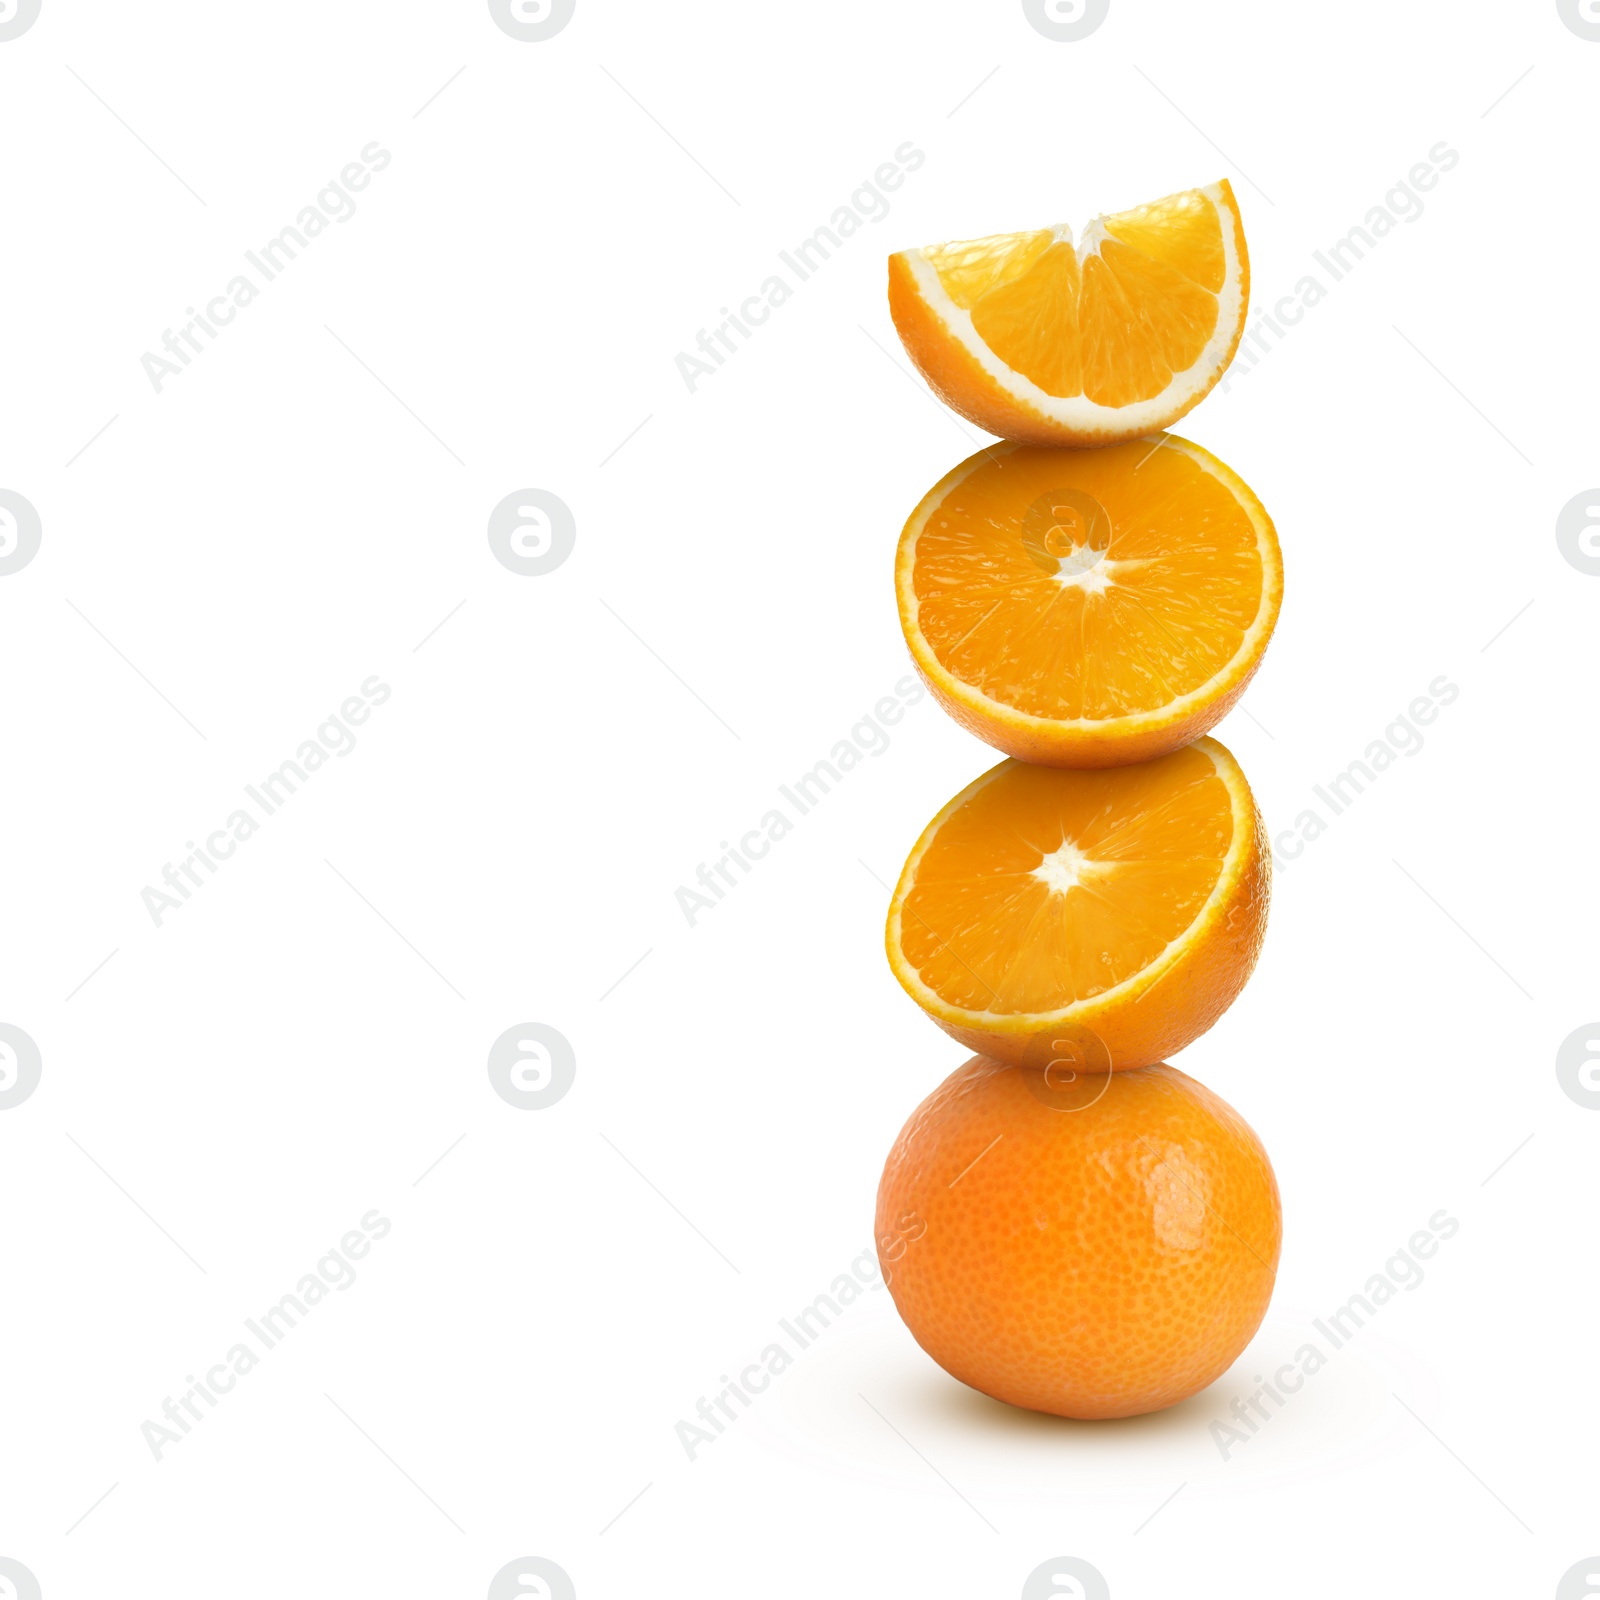 Image of Stacked cut and whole oranges on white background